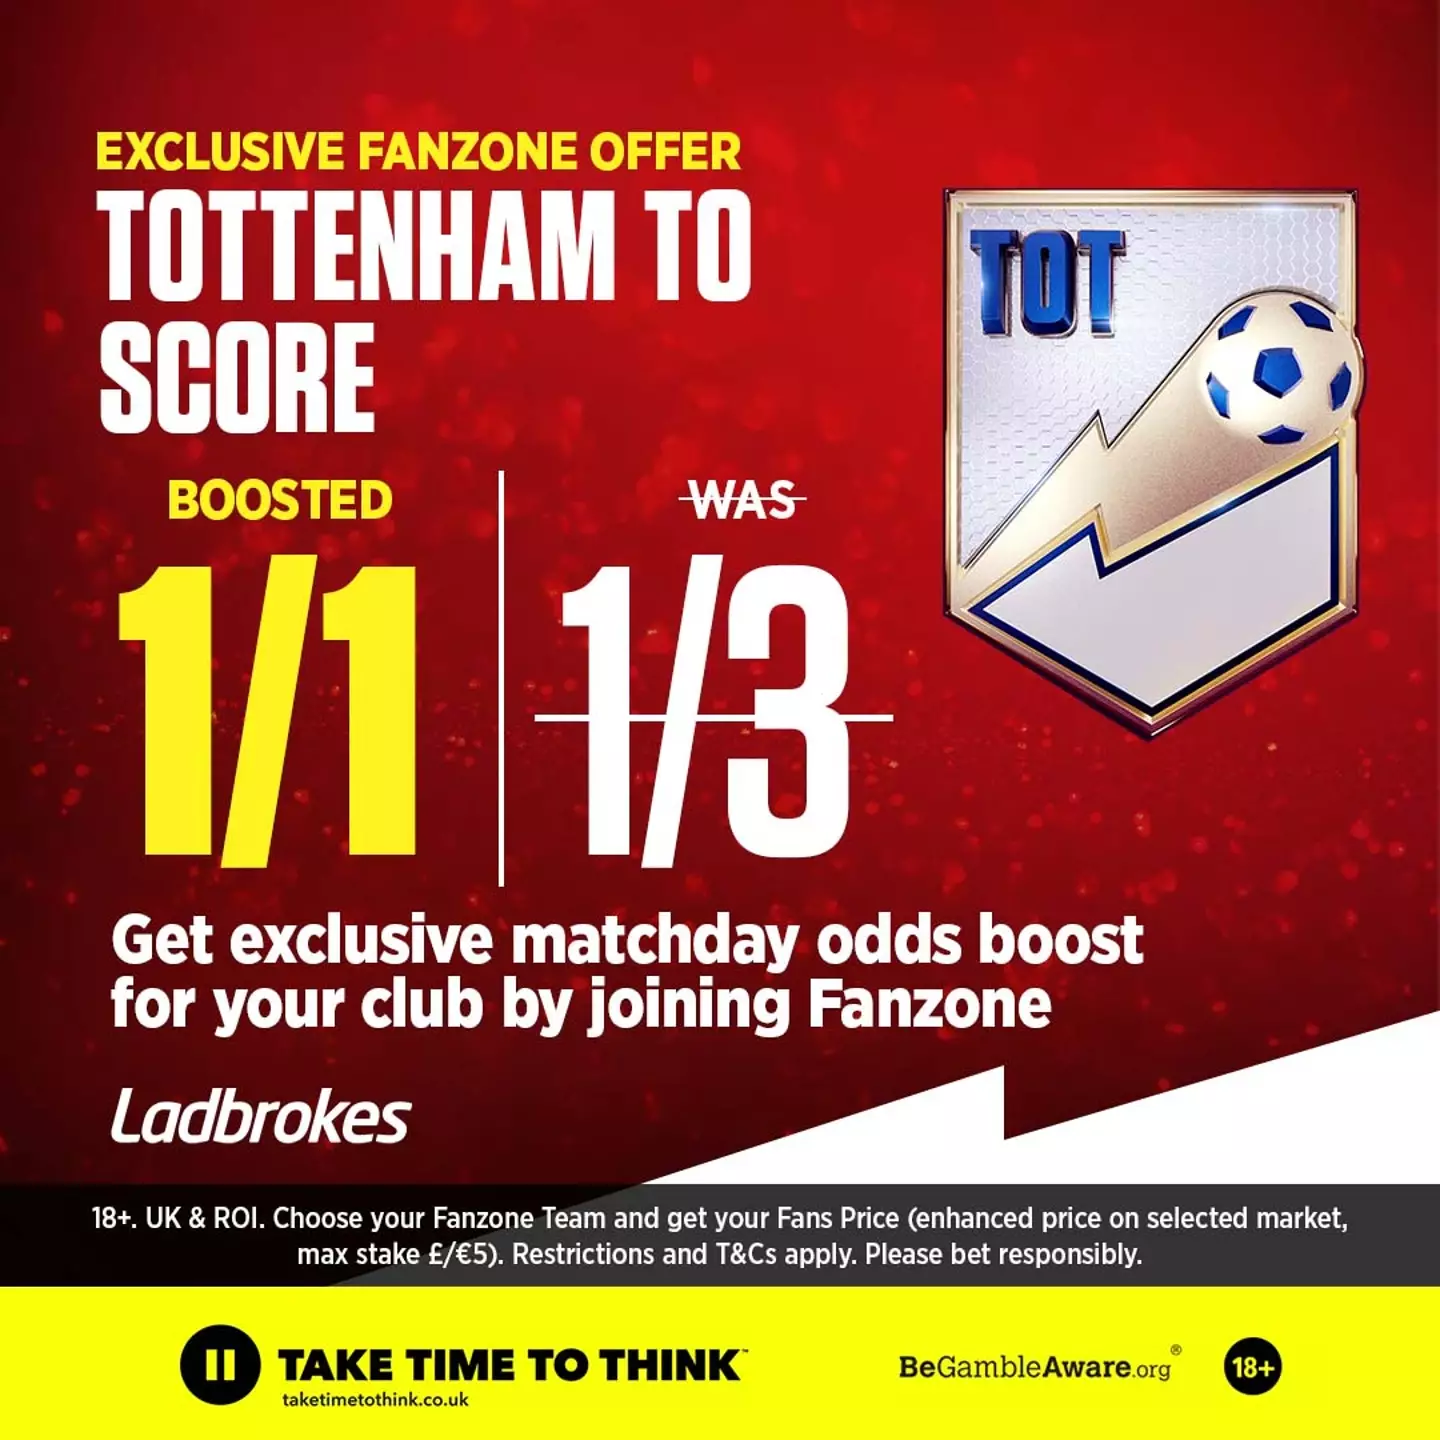 Exclusive Fanzone offer for all Tottenham fans this weekend